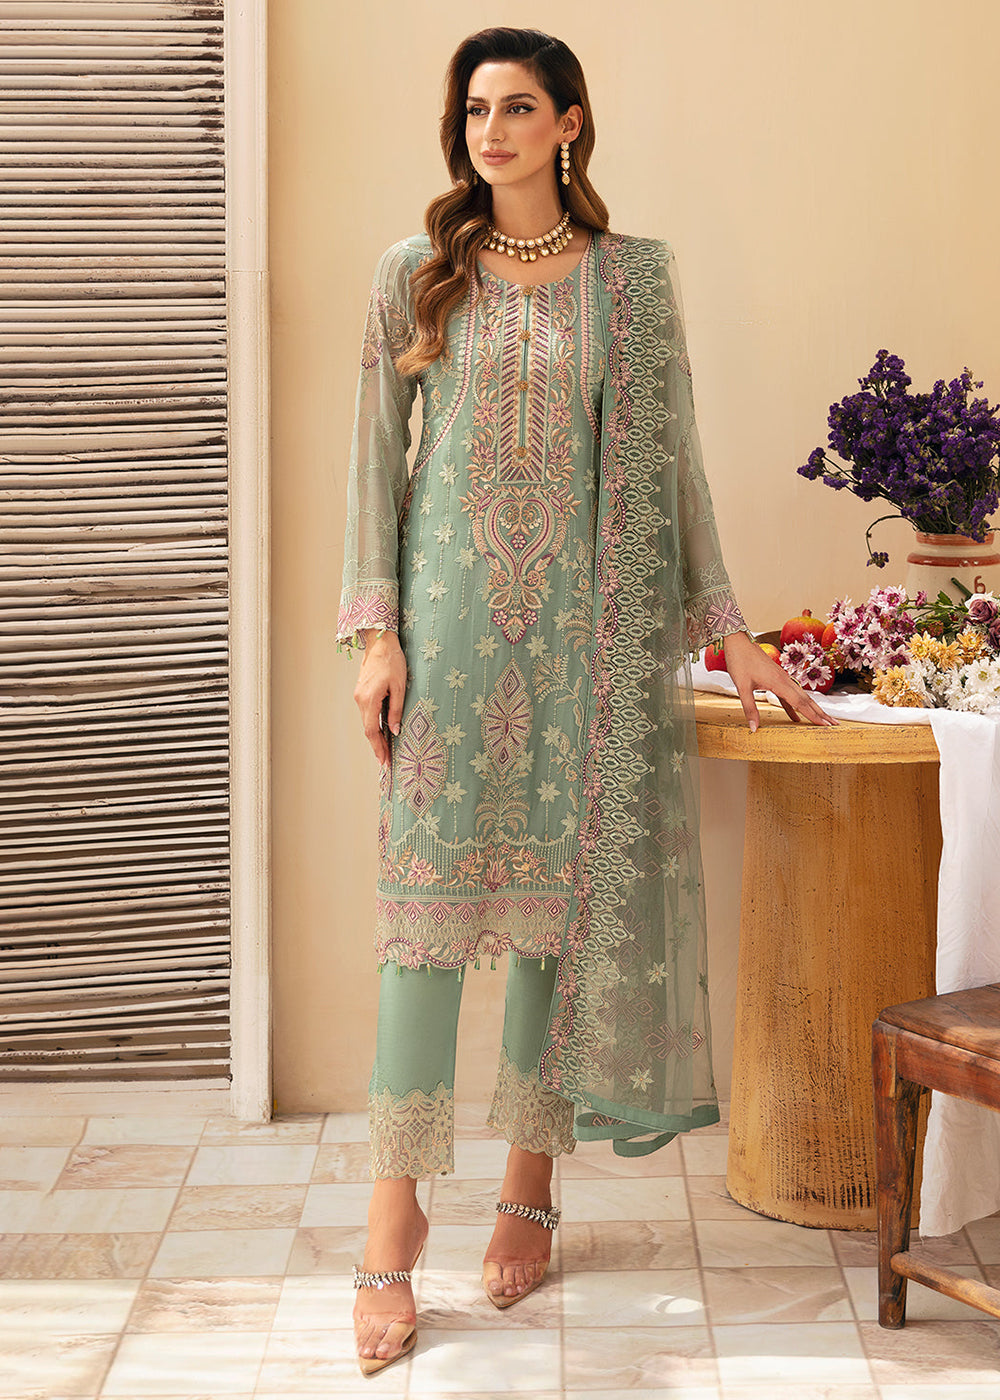 Buy Now Chevron Luxury Chiffon Collection 24 by Ramsha | A-901 Online at Empress in USA, UK, Canada, Germany, Italy, Dubai & Worldwide at Empress Clothing.